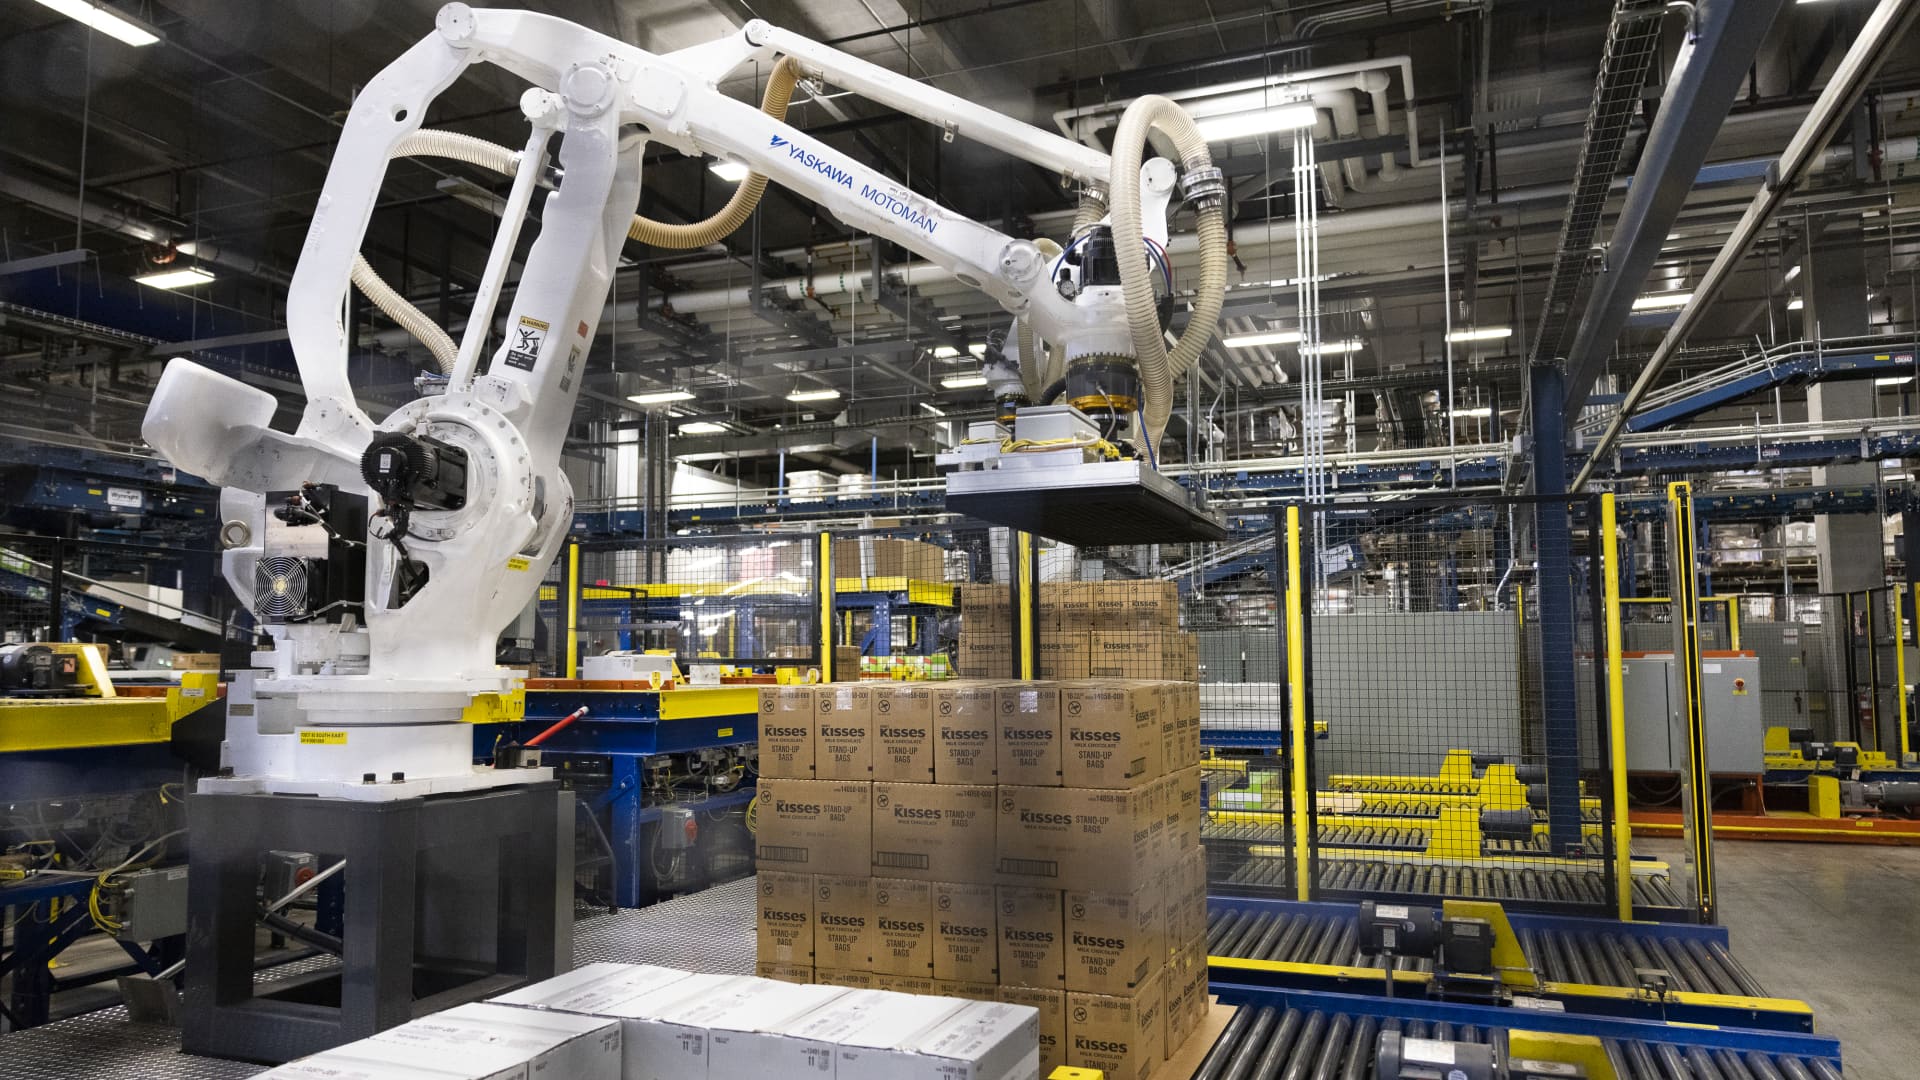 A.I. could ‘remove all human touchpoints’ in supply chains. Here’s what that means